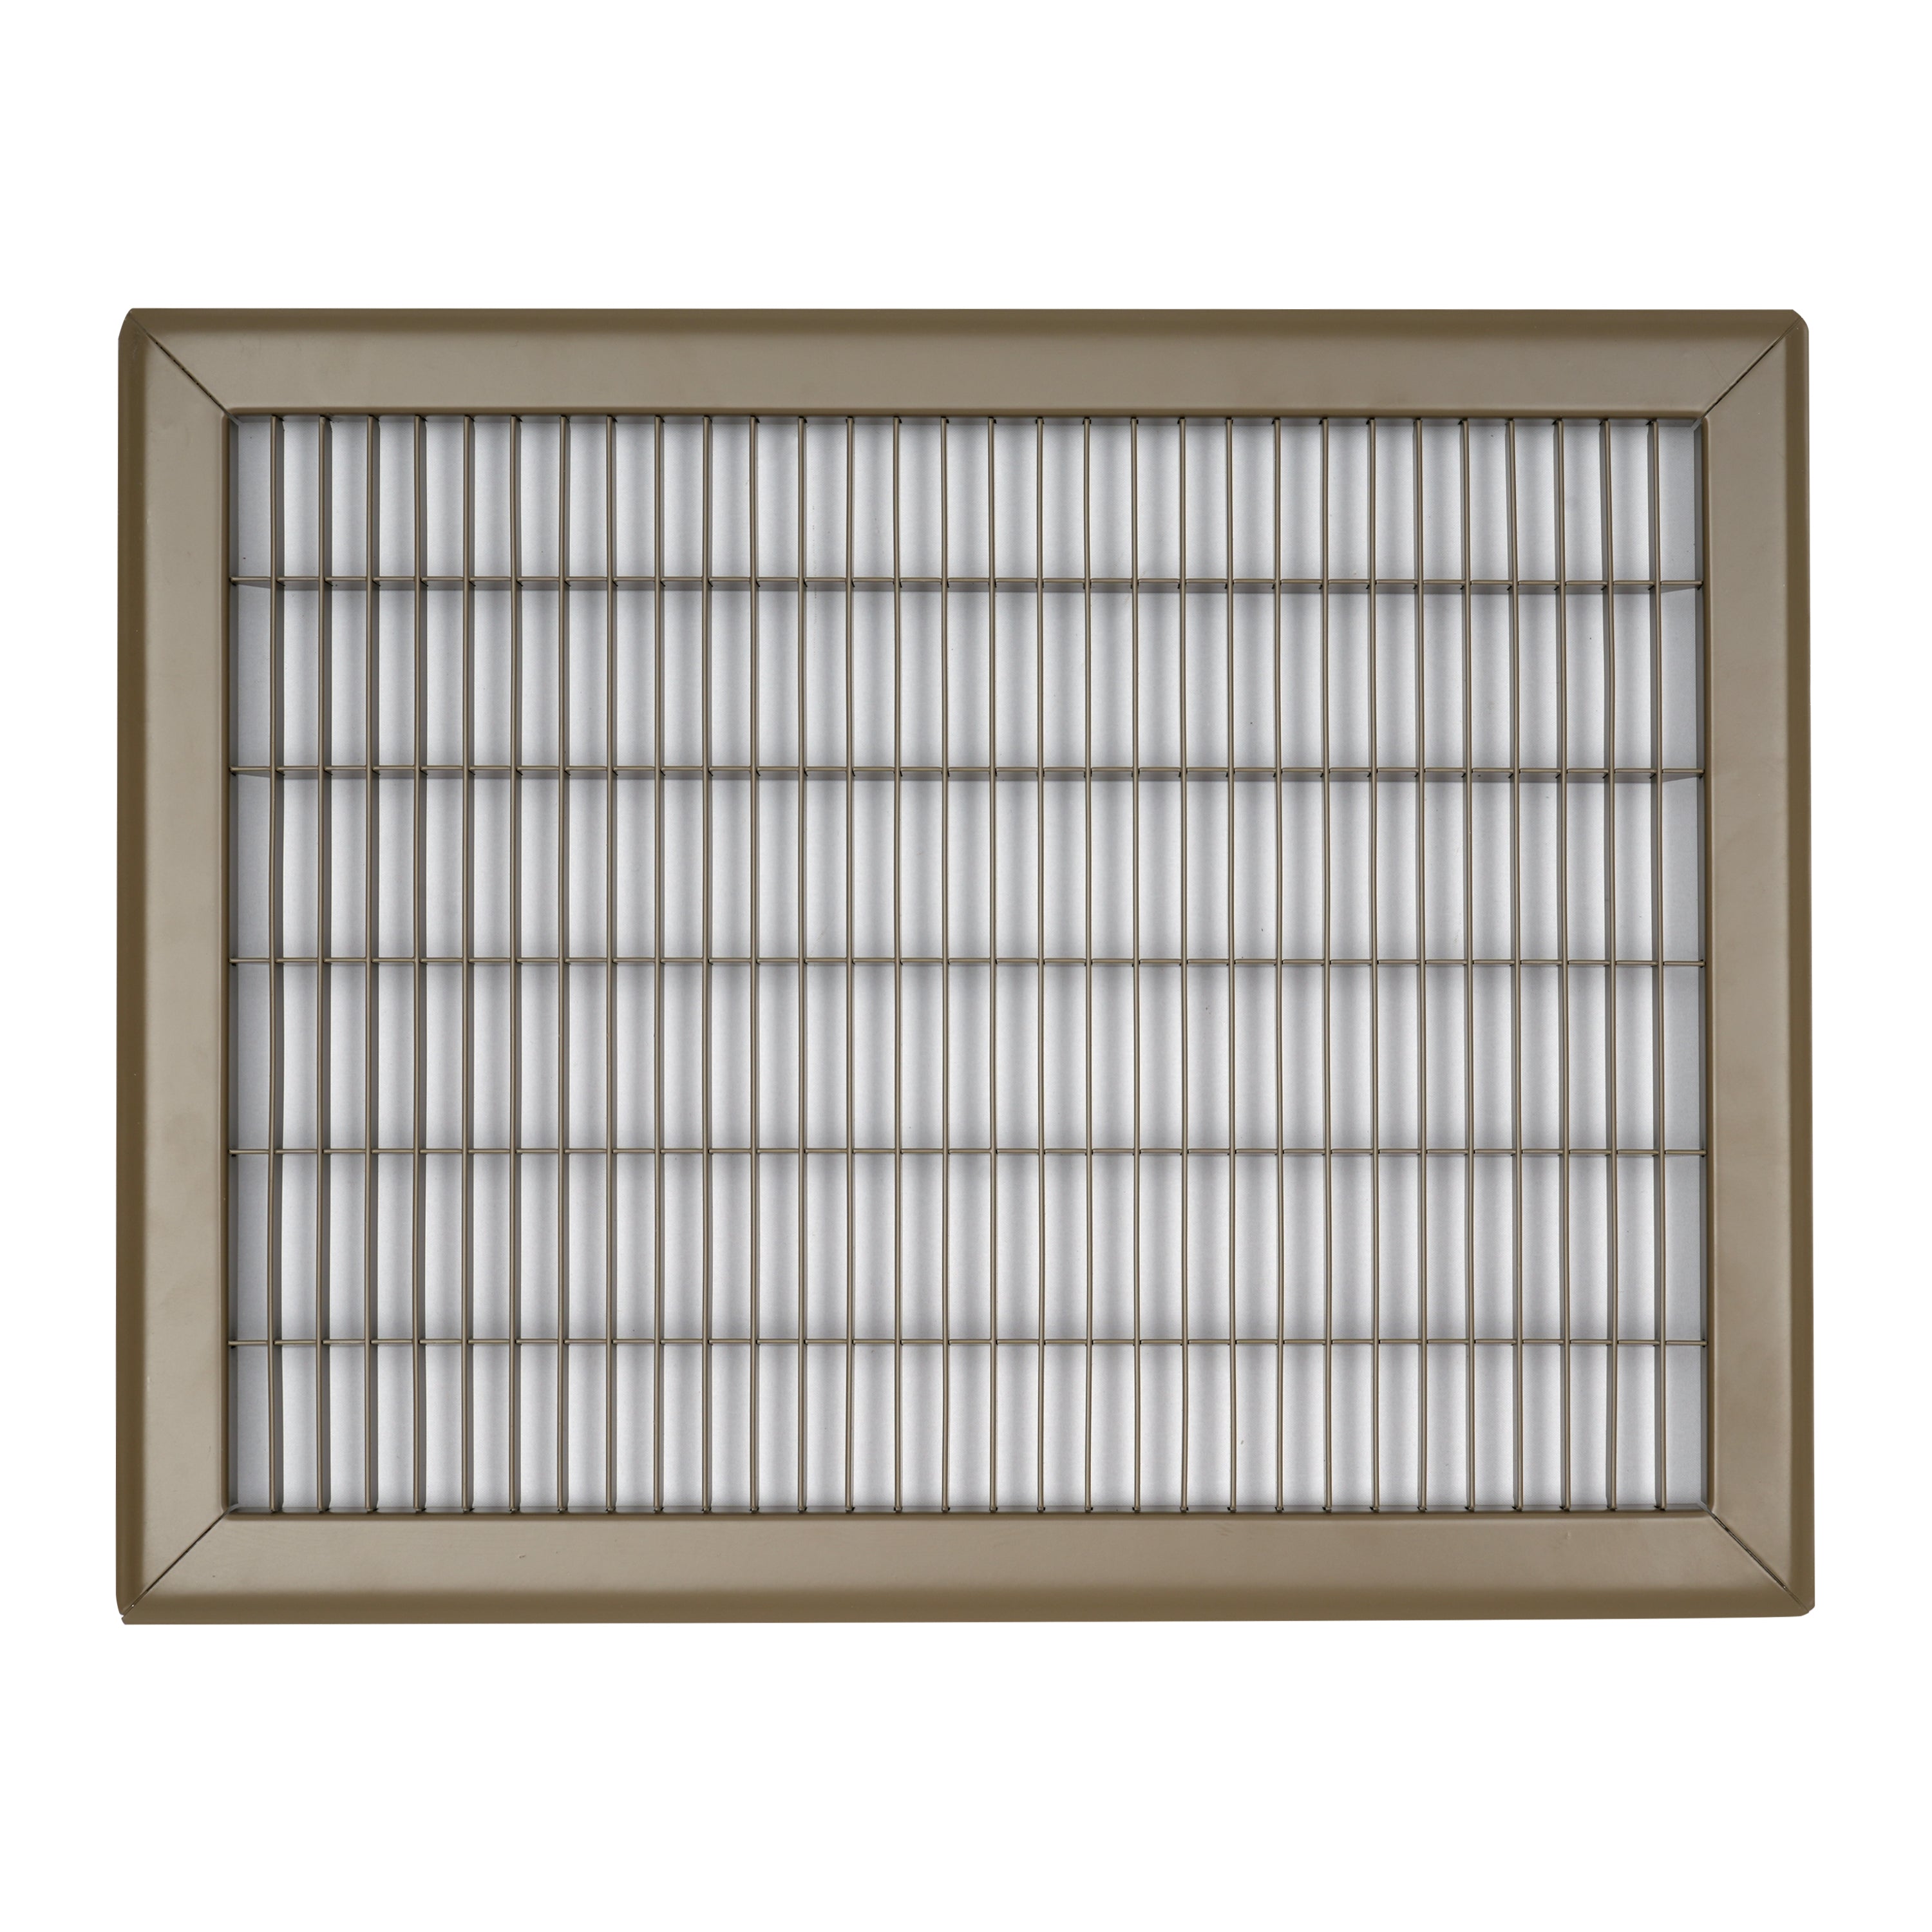 12"W x 16"H [Duct Opening] Return Air Floor Grille | Vent Cover Grill for Floor - Brown| Outer Dimensions: 13.75"W X 17.75"H